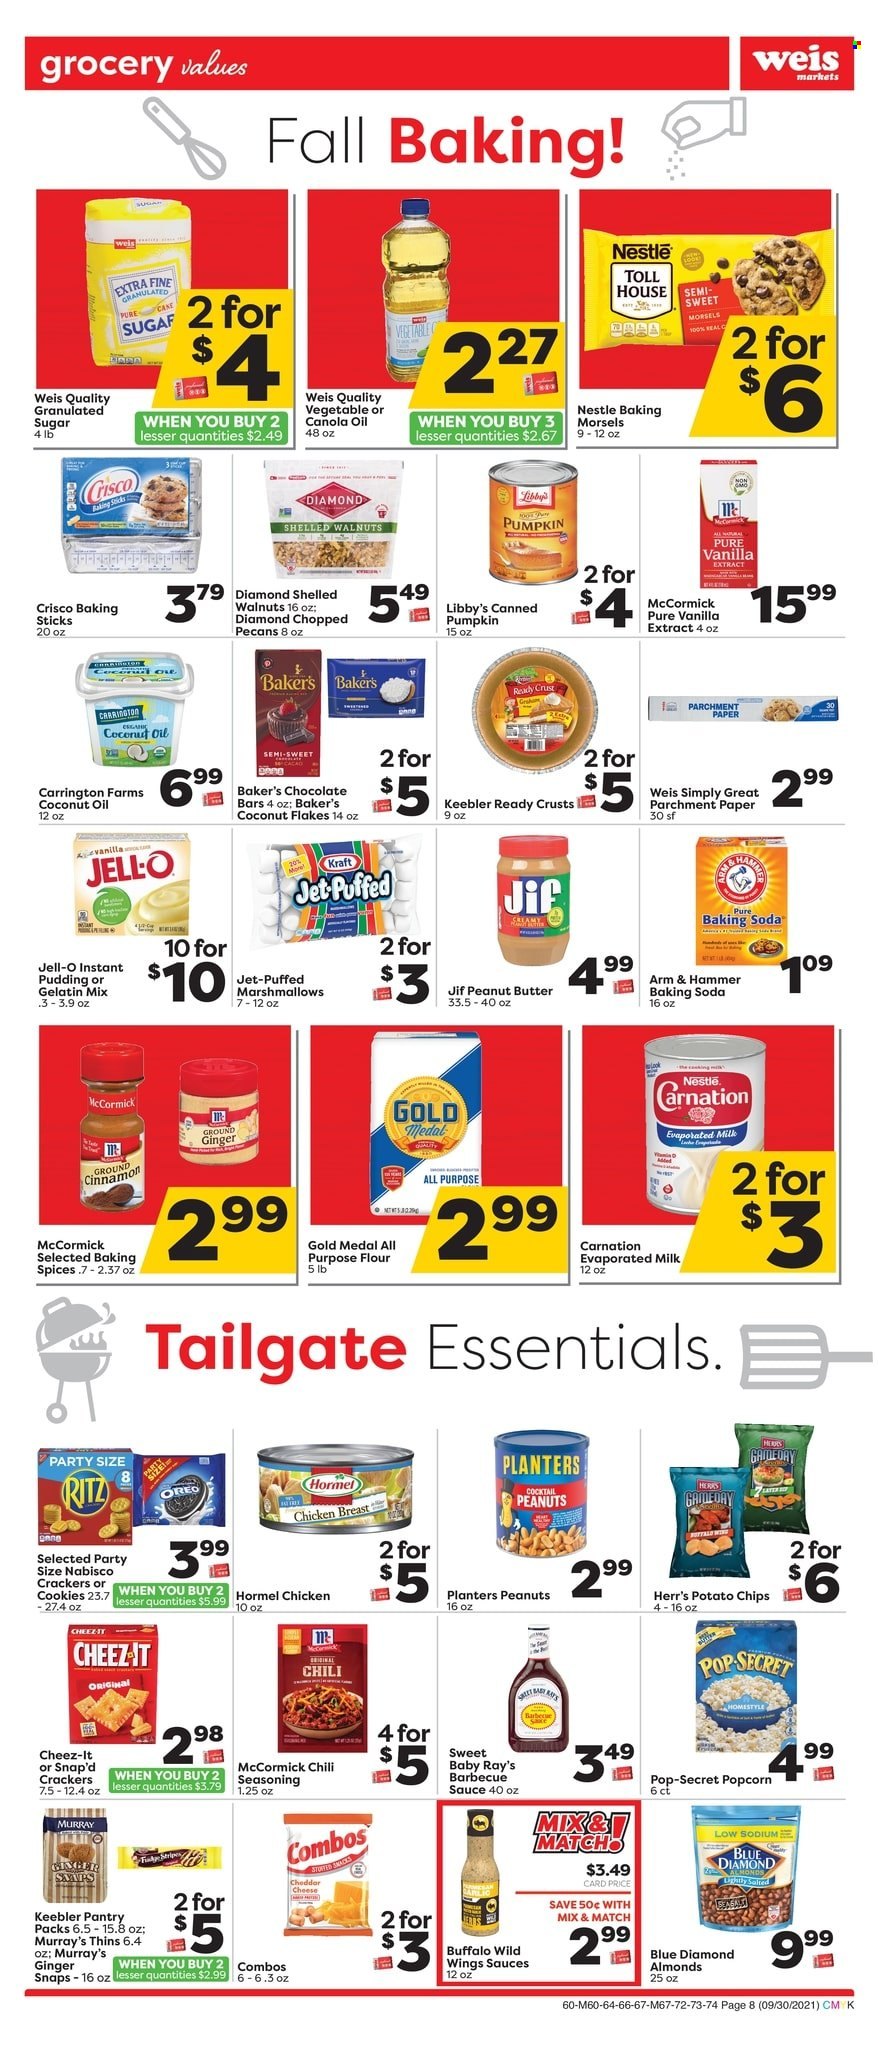 thumbnail - Weis Flyer - 09/30/2021 - 11/04/2021 - Sales products - pumpkin, chicken breasts, Kraft®, Hormel, cheese, pudding, Oreo, evaporated milk, cookies, marshmallows, Nestlé, chocolate, crackers, Keebler, potato chips, chips, Thins, popcorn, Cheez-It, ARM & HAMMER, bicarbonate of soda, Crisco, flour, sugar, Jell-O, vanilla extract, ground ginger, spice, cinnamon, BBQ sauce, canola oil, coconut oil, oil, peanut butter, Jif, almonds, flaked coconut, walnuts, peanuts, pecans, Planters, Blue Diamond, Jet, paper. Page 7.